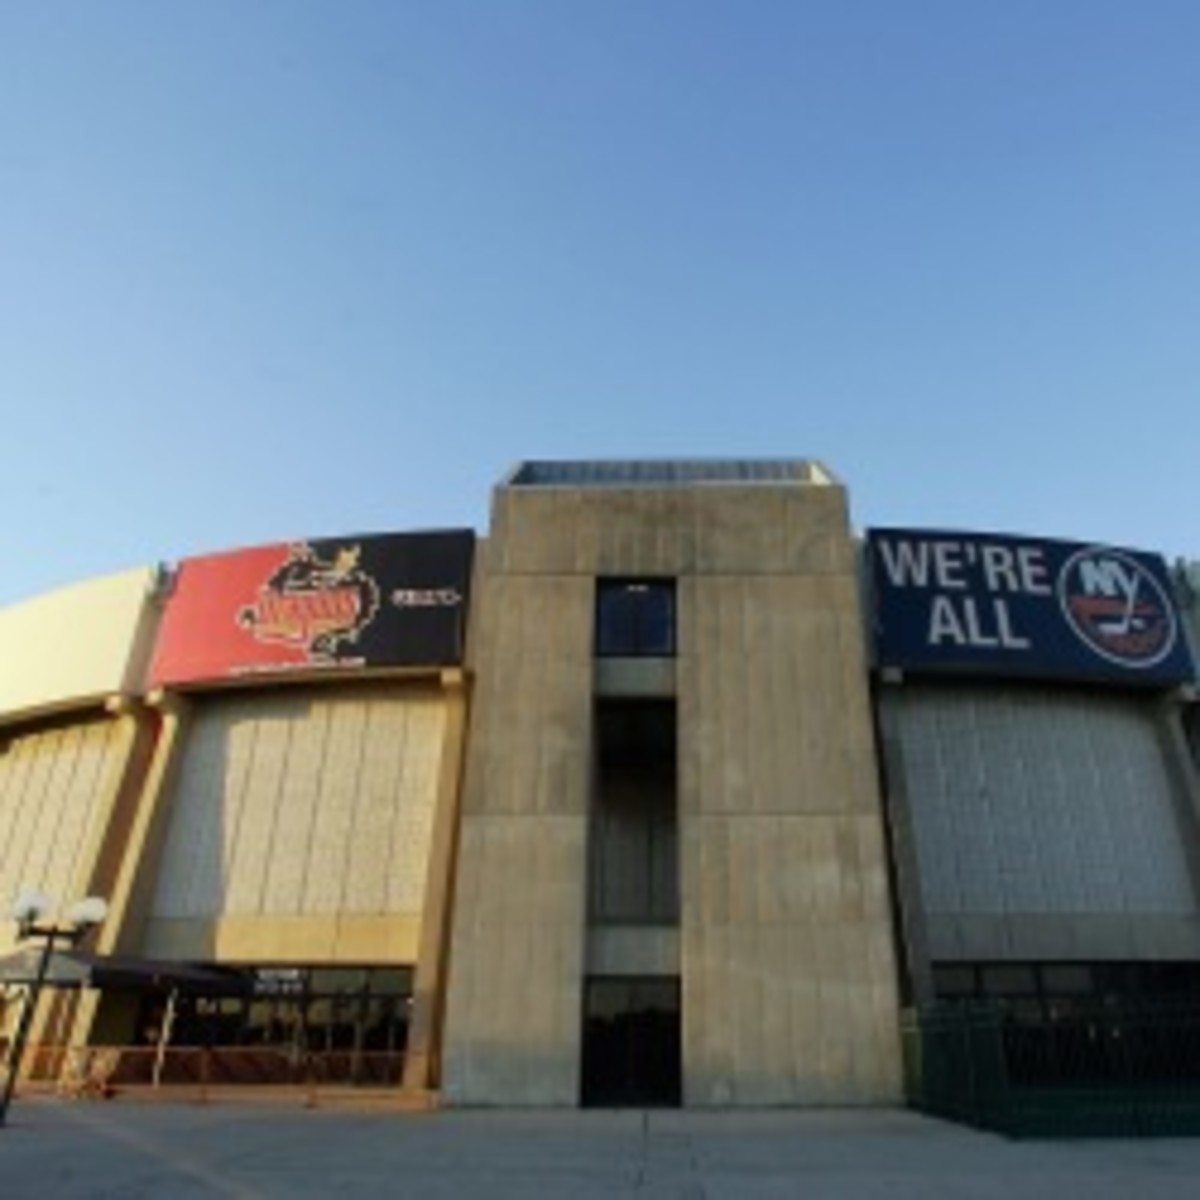 The Islanders have played in Nassau Coliseum since 1972. (Jim McIsaac/Getty Images)